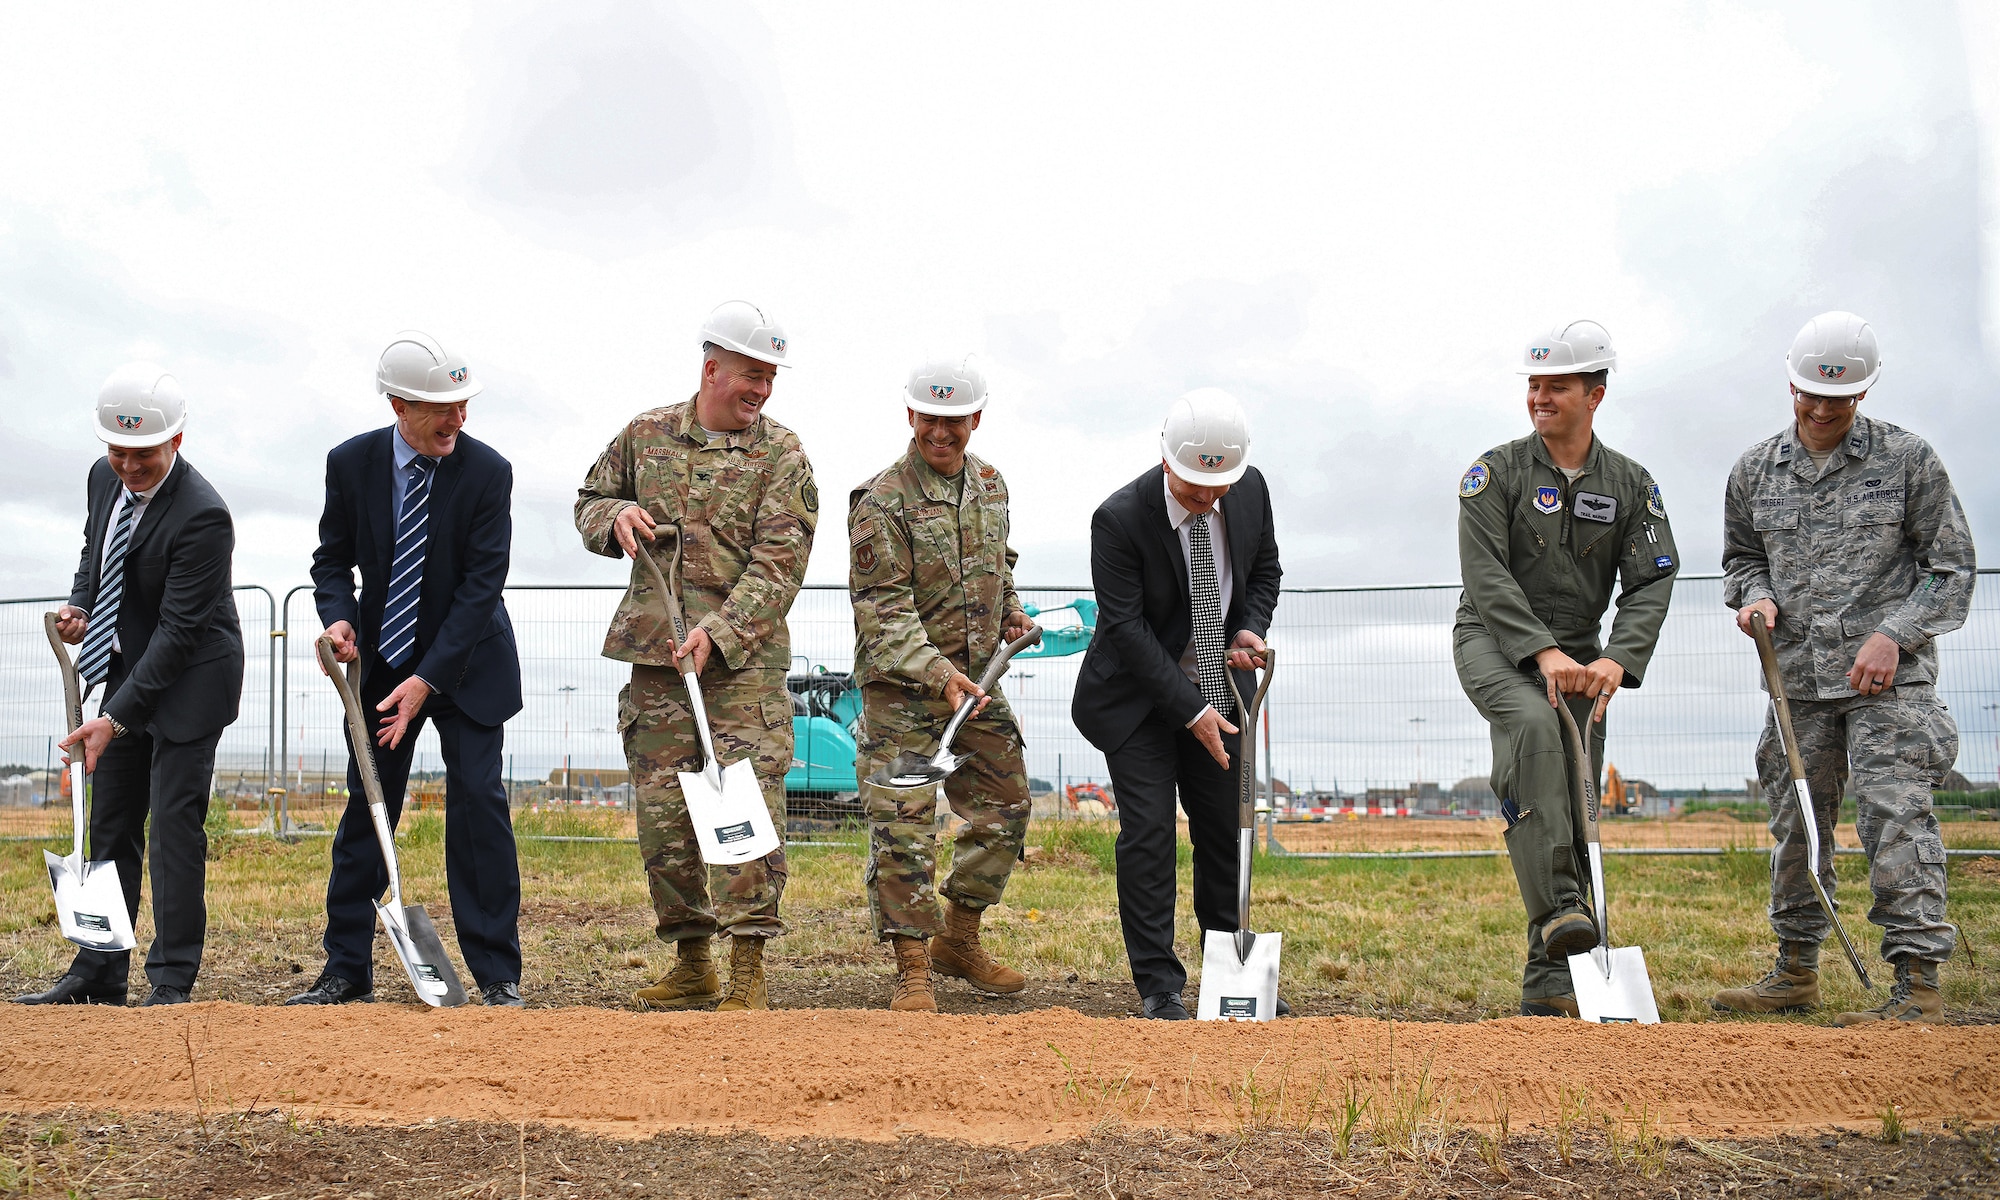 General Jeffrey L. Harrigian, U.S. Air Forces in Europe and Air Forces Africa commander, (center), poses for a photo with 48th Fighter Wing personnel and local civic leaders, partners and contractors during an F-35 groundbreaking ceremony at RAF Lakenheath, England, July 15, 2019. The groundbreaking follows the ongoing construction projects that will facilitate two F-35A Lighting II squadrons, making RAF Lakenheath the first permanent international site for U.S. fifth generation aircraft in Europe. (U.S. Air Force photo by Airman 1st Class Shanice Williams-Jones)